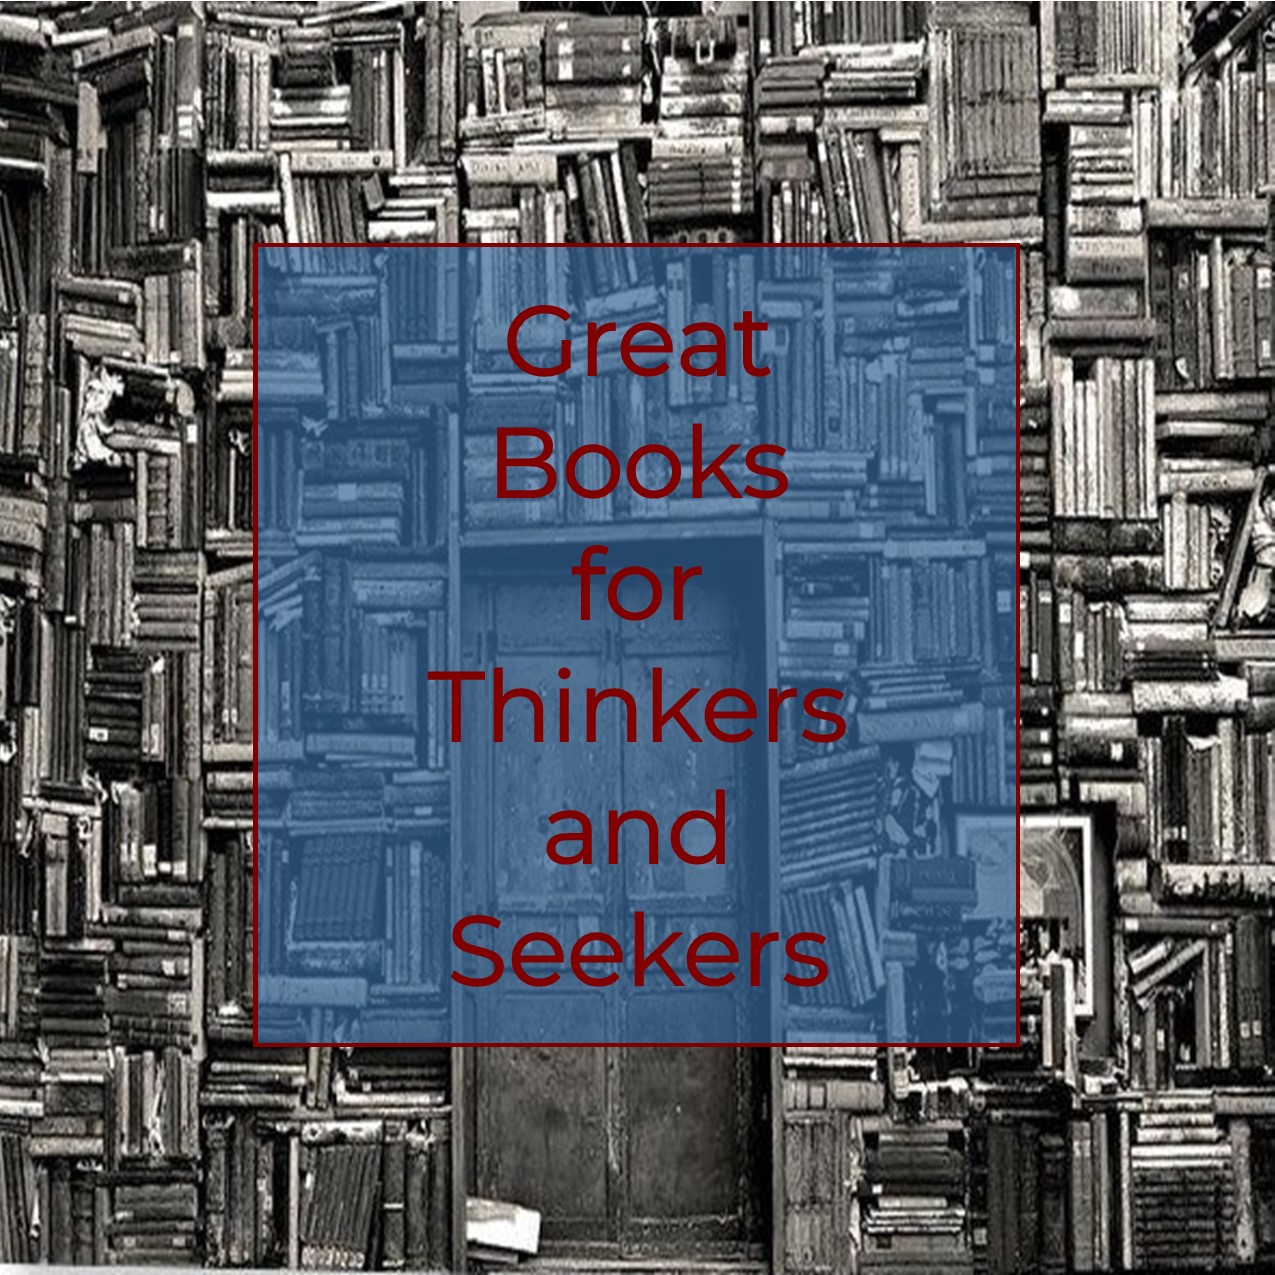 Great Books for Thinkers and Seekers